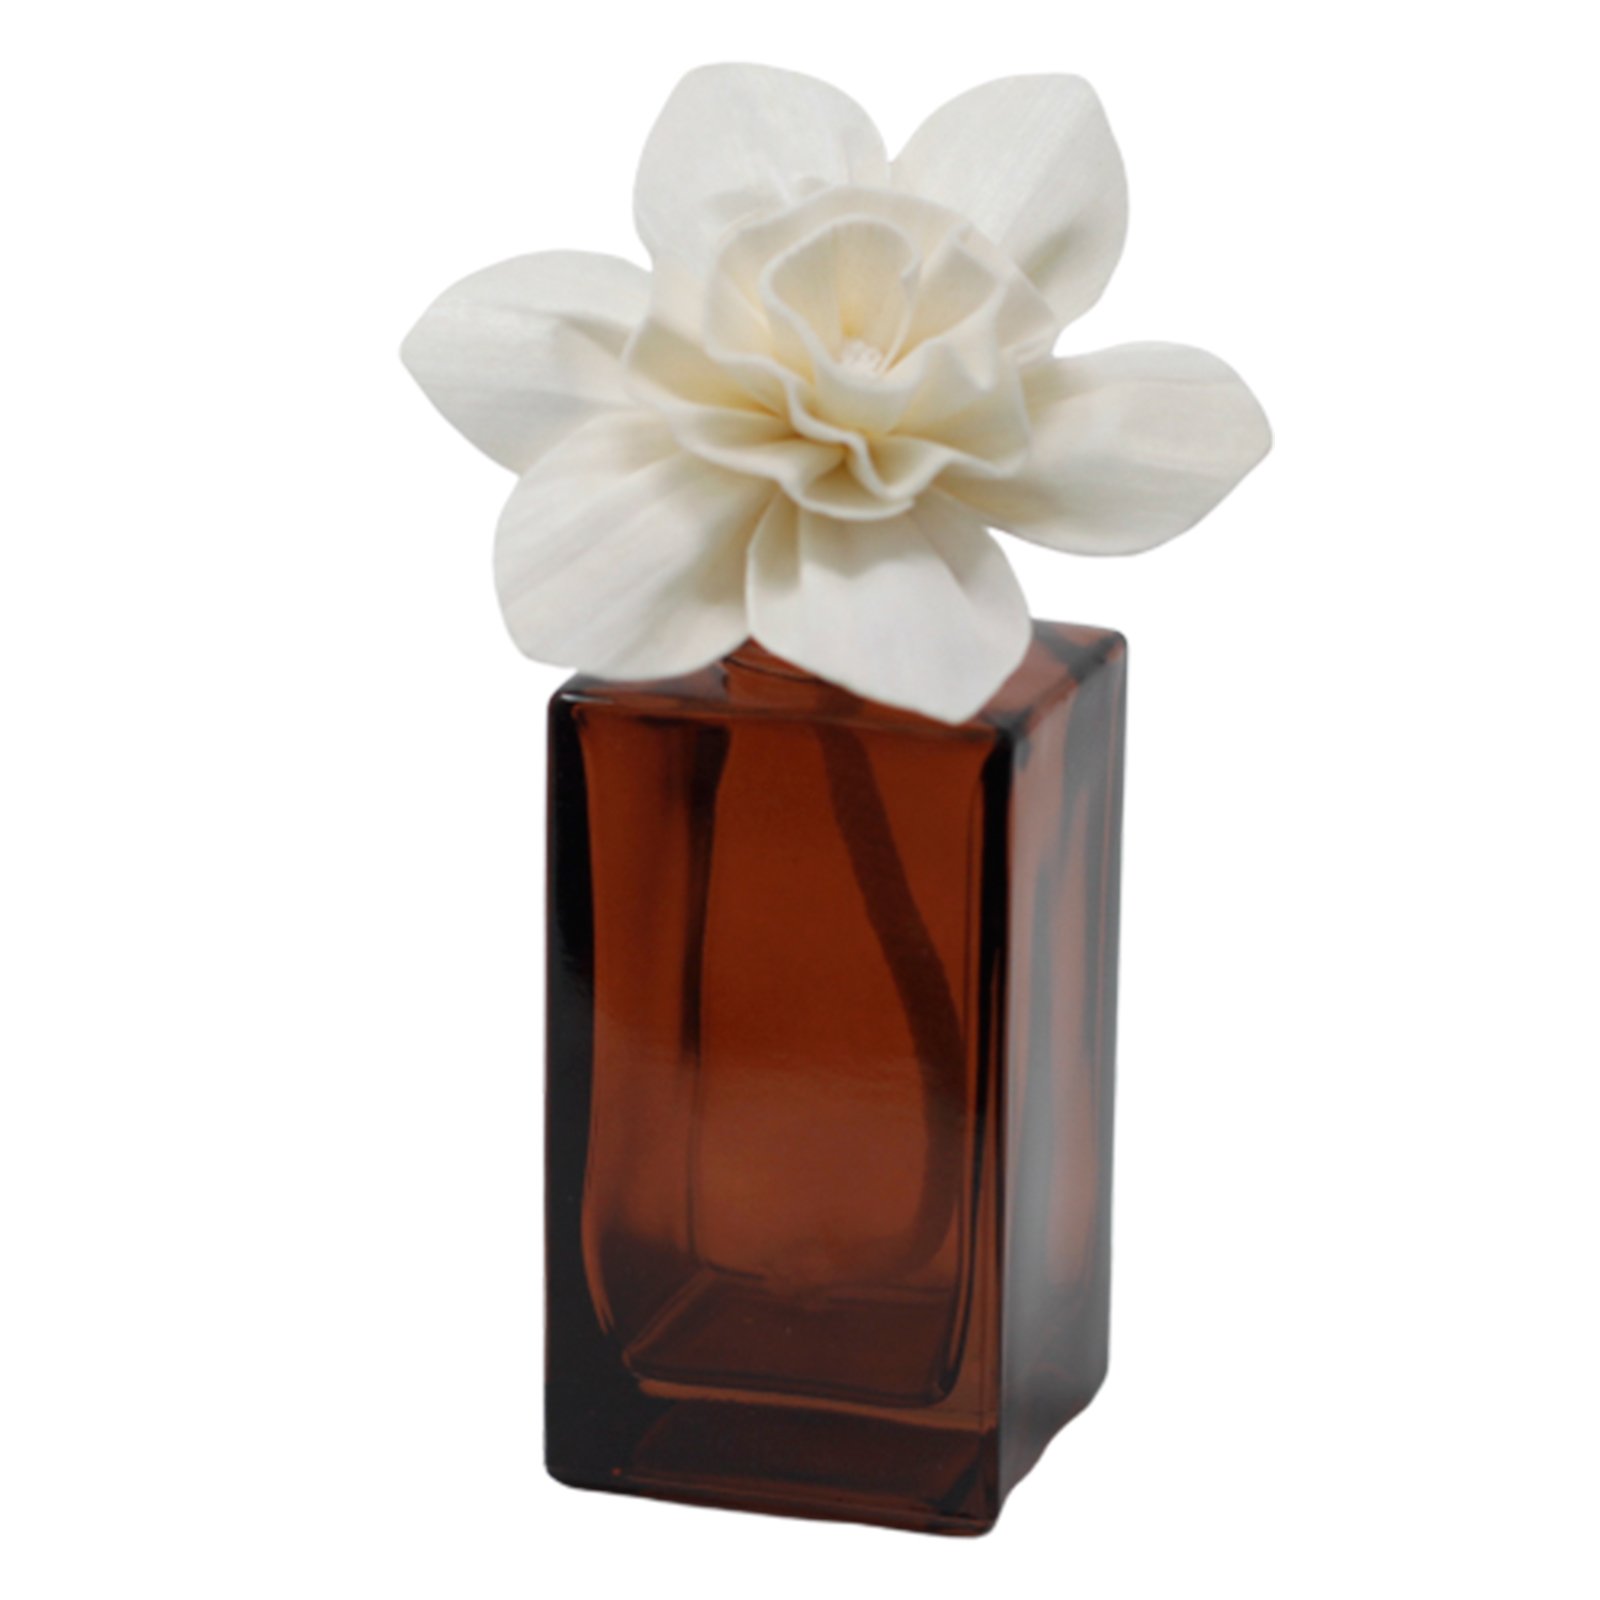 Natural Diffuser Flowers - Large Lily on String